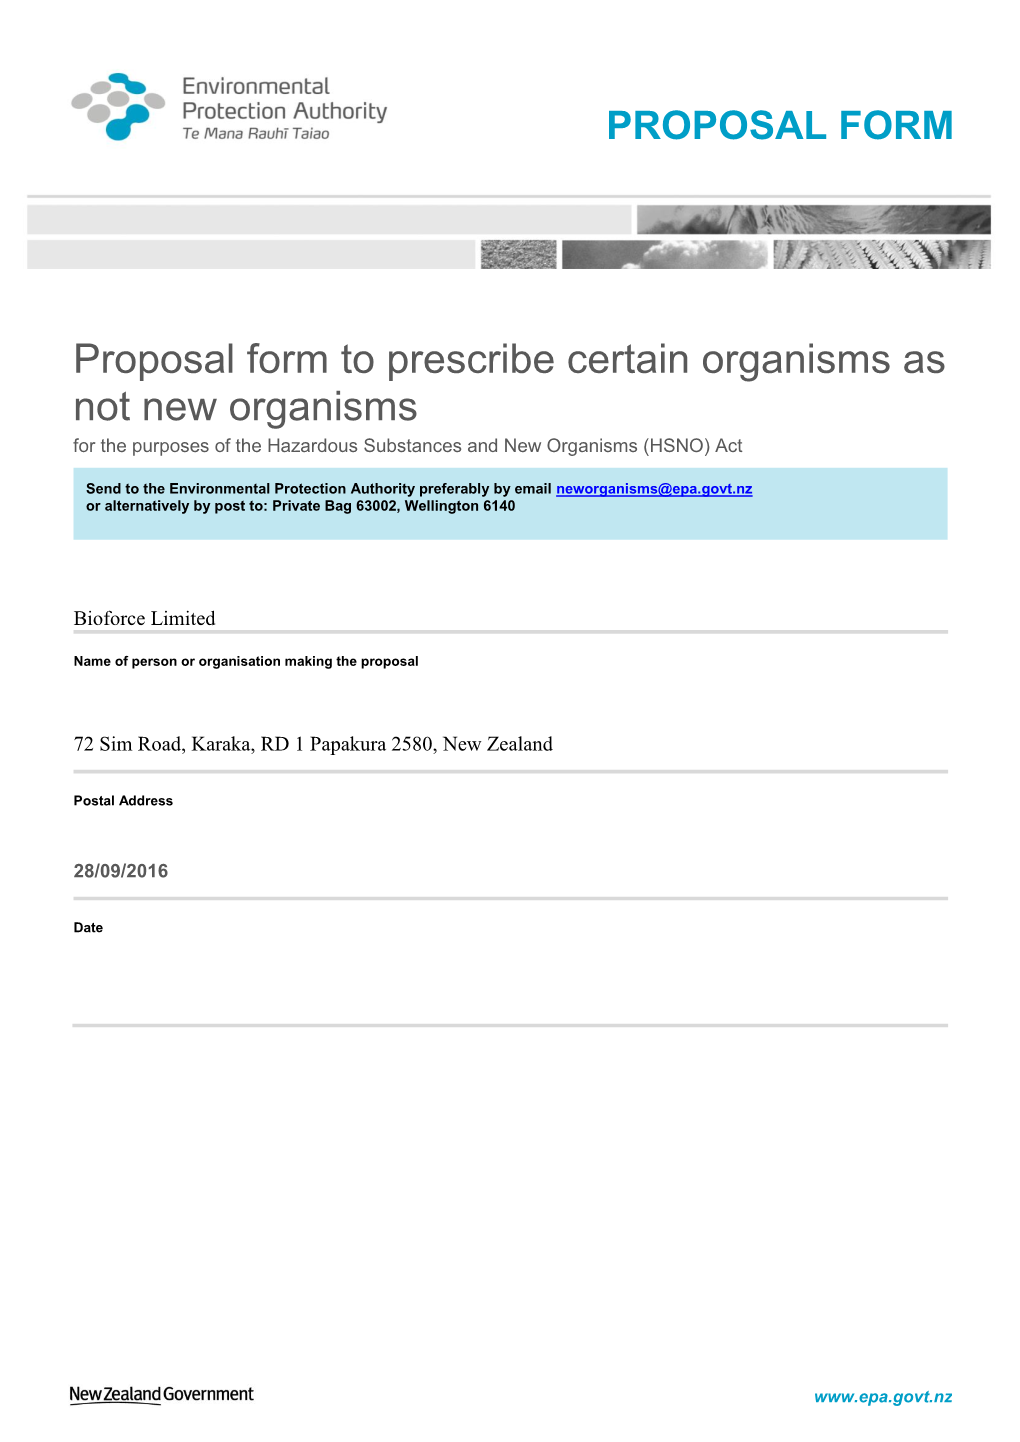 Proposal Form to Prescribe Certain Organisms As Not New Organisms for the Purposes of the Hazardous Substances and New Organisms (HSNO) Act